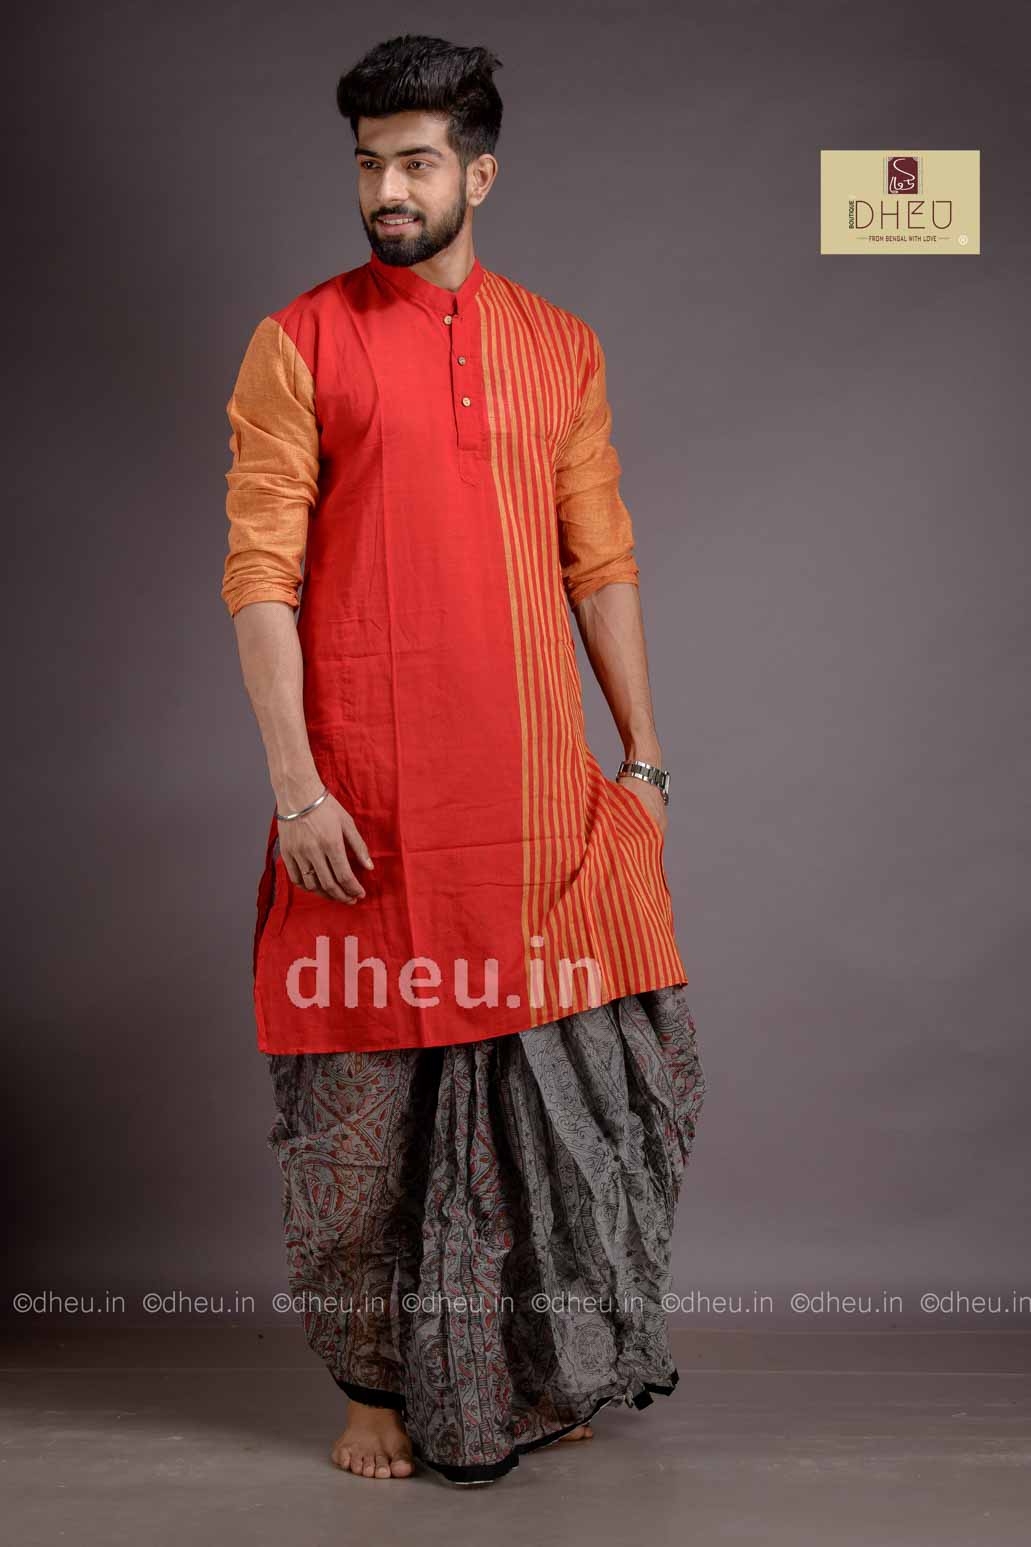 Casual designer red-orange kurta at low cost only in dheu.in